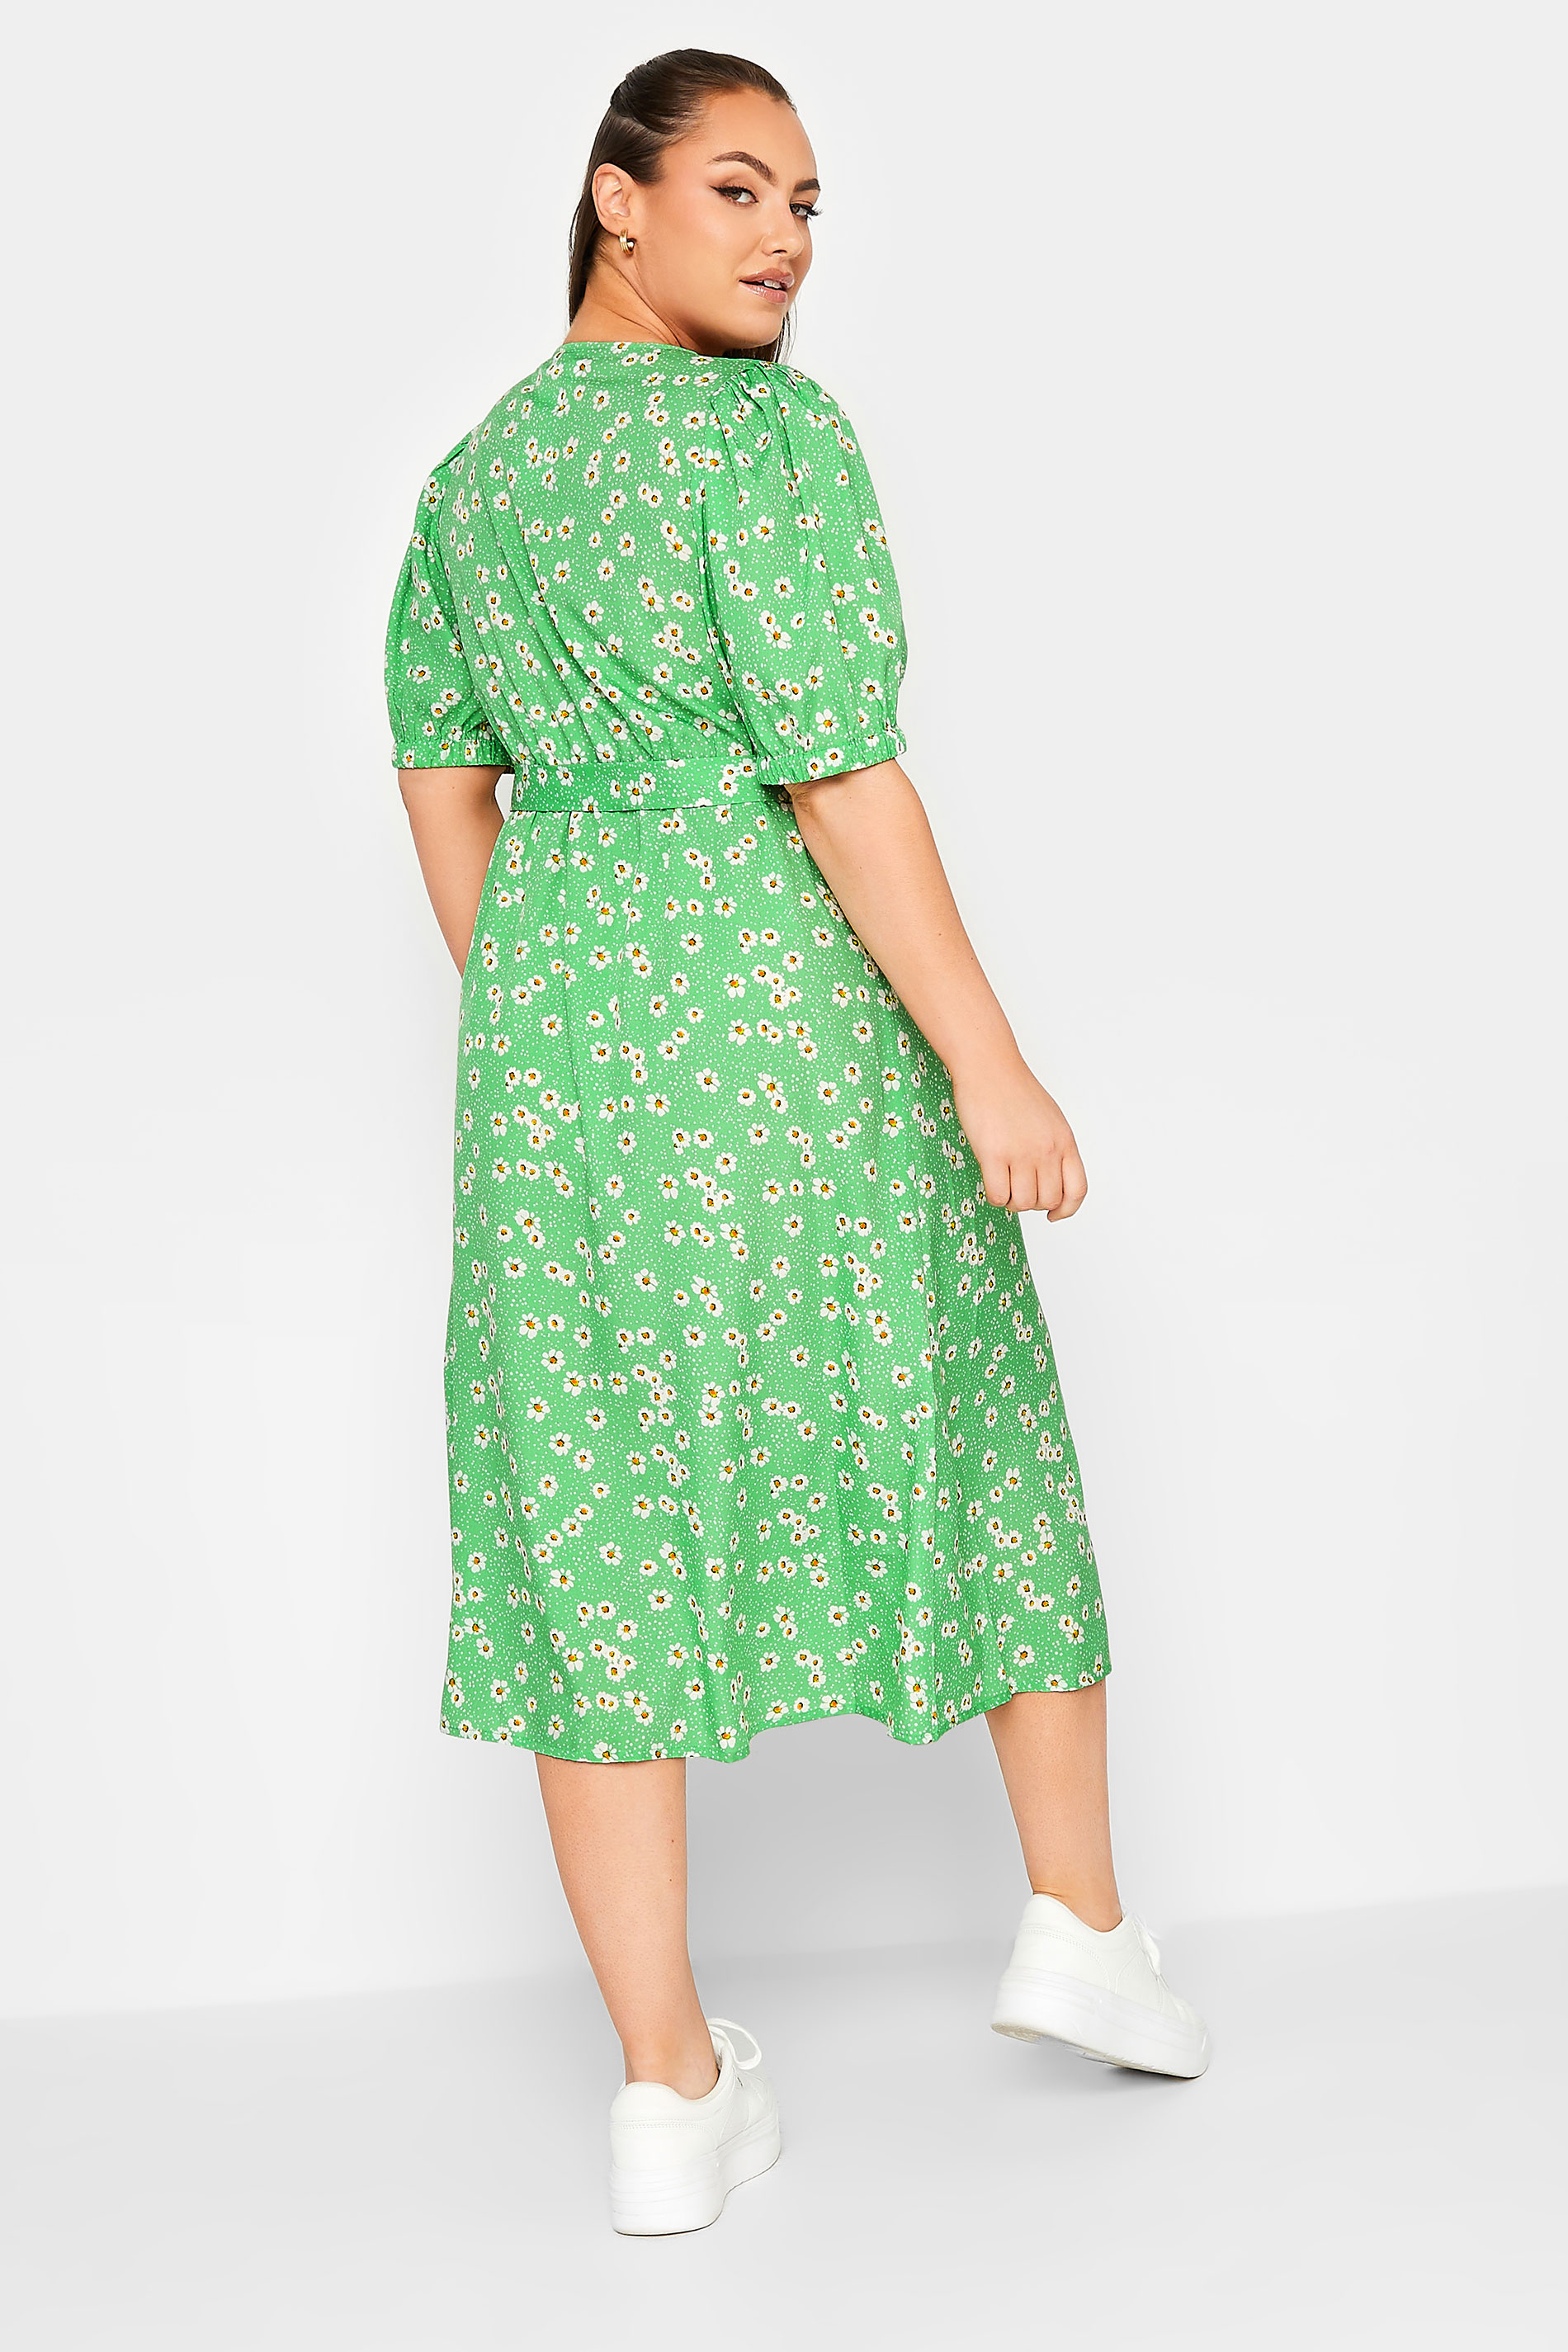 LIMITED COLLECTION Curve Green Sweetheart Neckline Floral Print Tea Dress | Yours Clothing 3